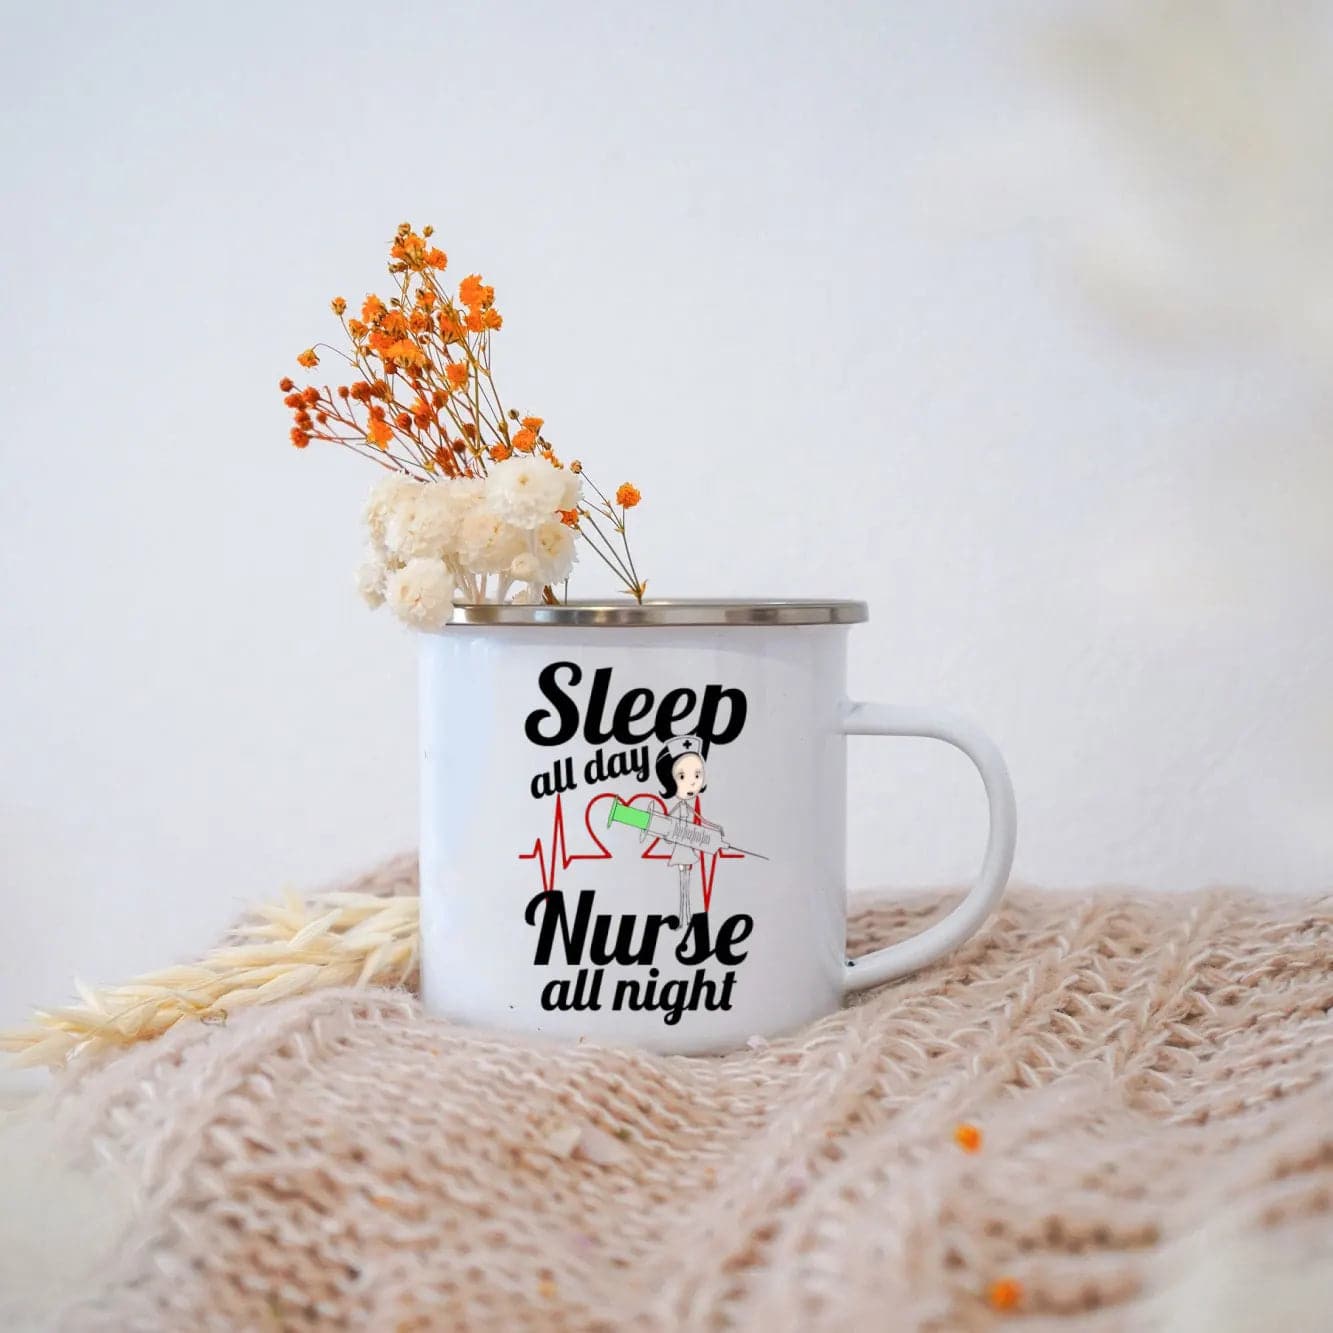 Enamel Mug Perfect Gifts for Nurse - Perfect Gifts for Your Nurse Girlfriend